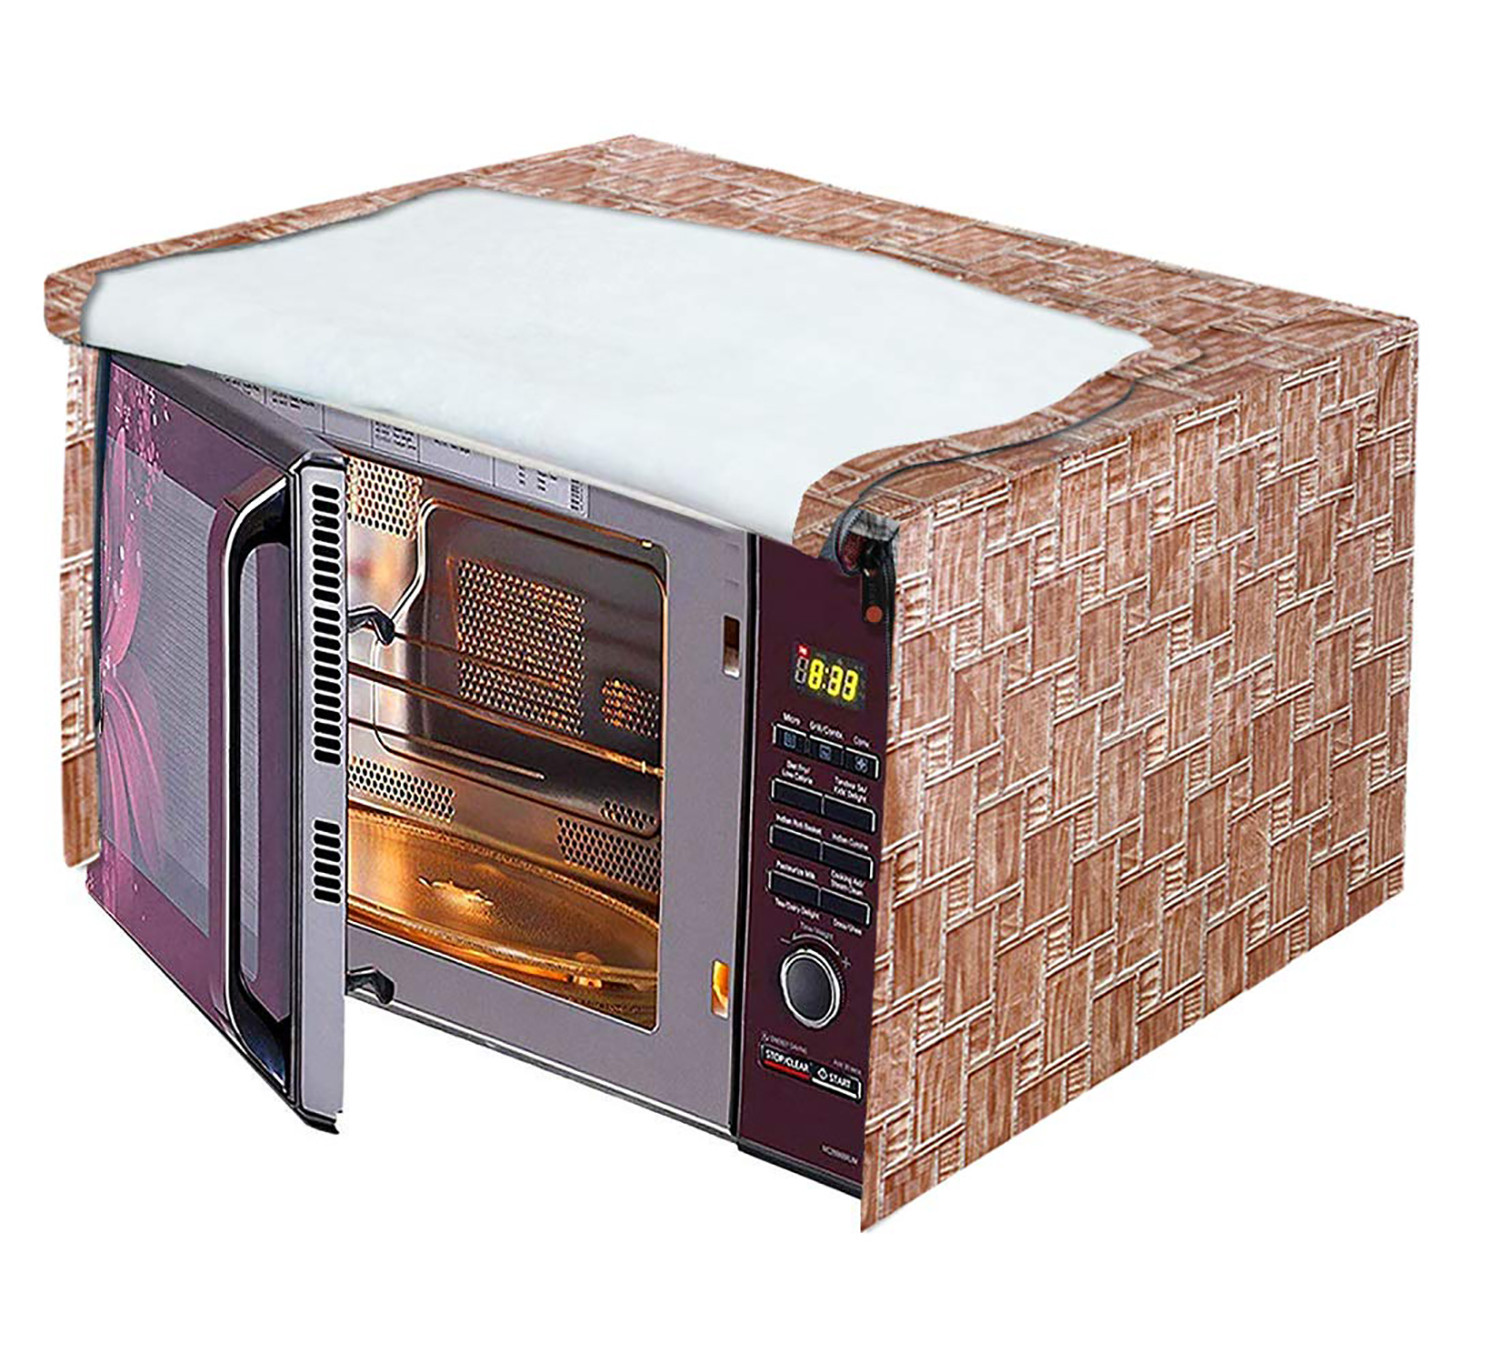 Kuber Industries PVC Wooden Check Printed Microwave Oven Cover,30 Ltr. (Brown)-HS43KUBMART25991